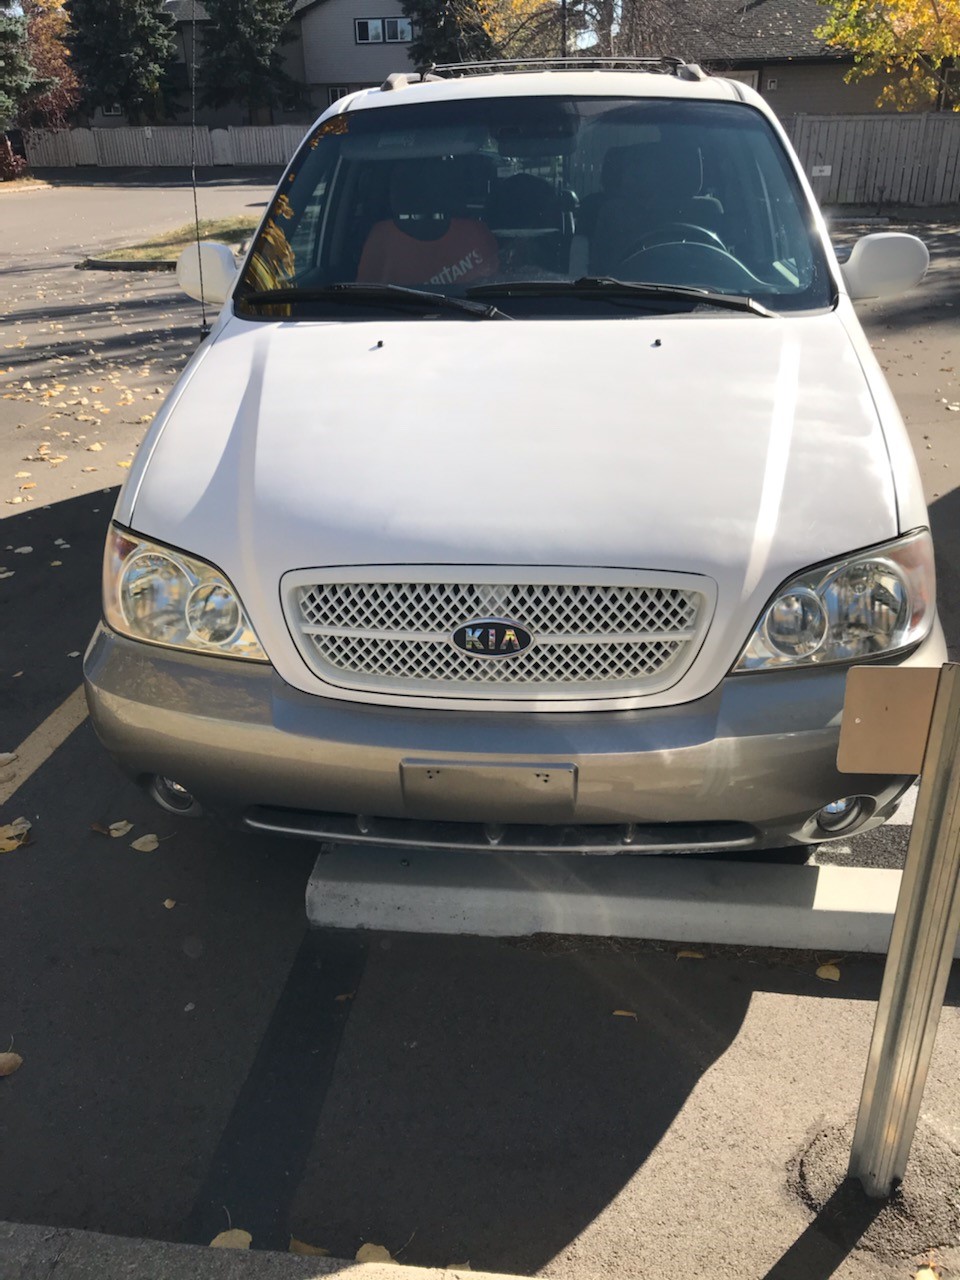 The owner of this van, in an undated photo, used to transport a wheelchair would like to have it back after it was stolen in broad daylight.